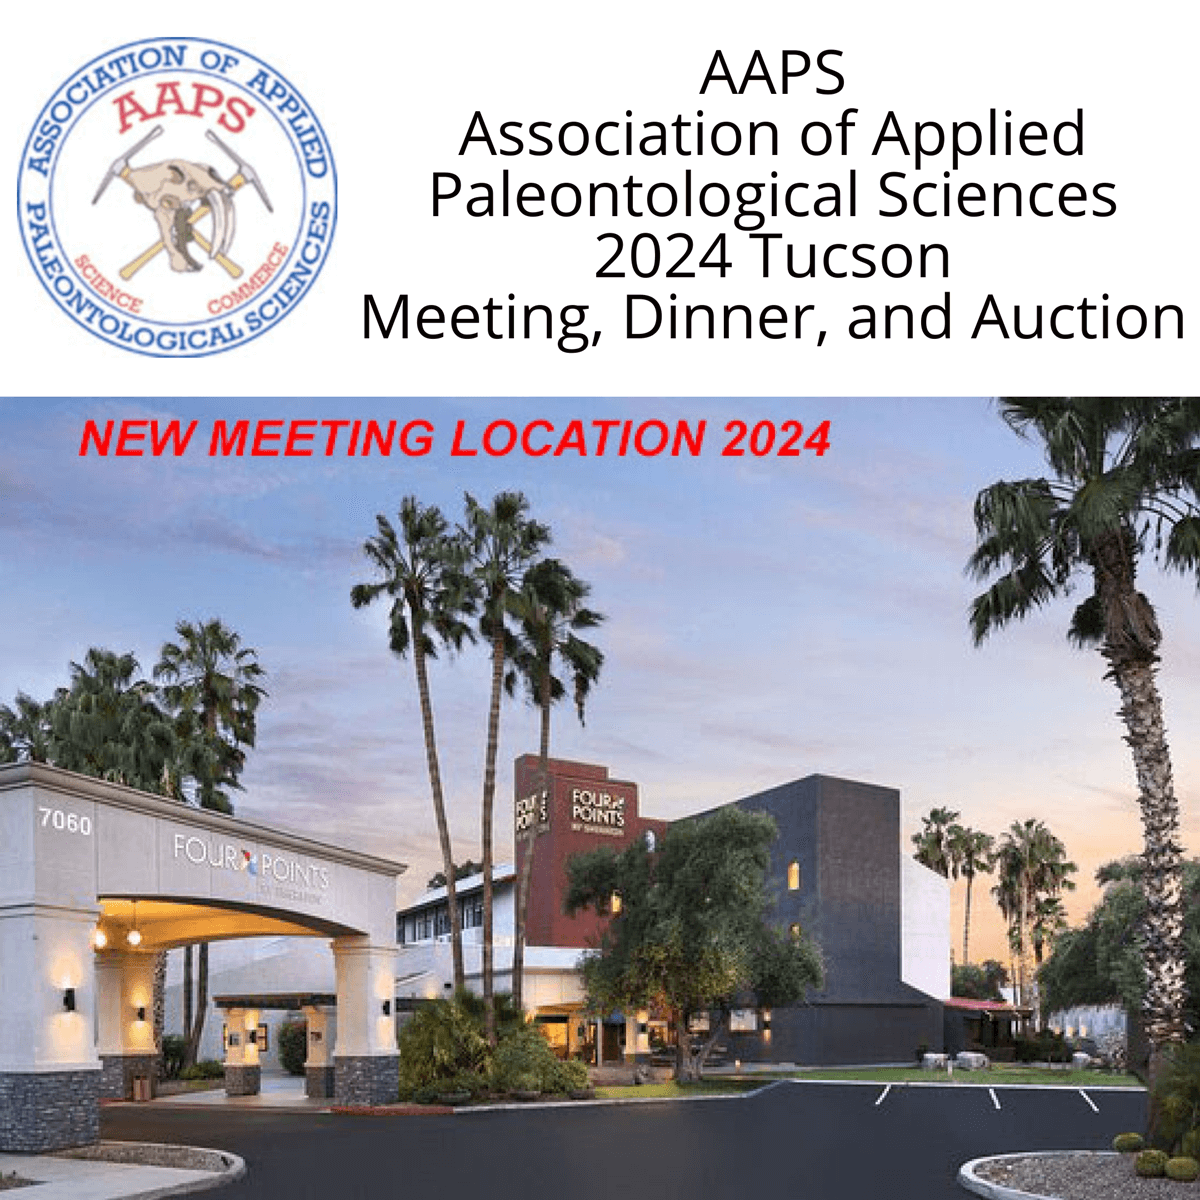 AAPS Tucson Meeting, Dinner, & Auction 2024 